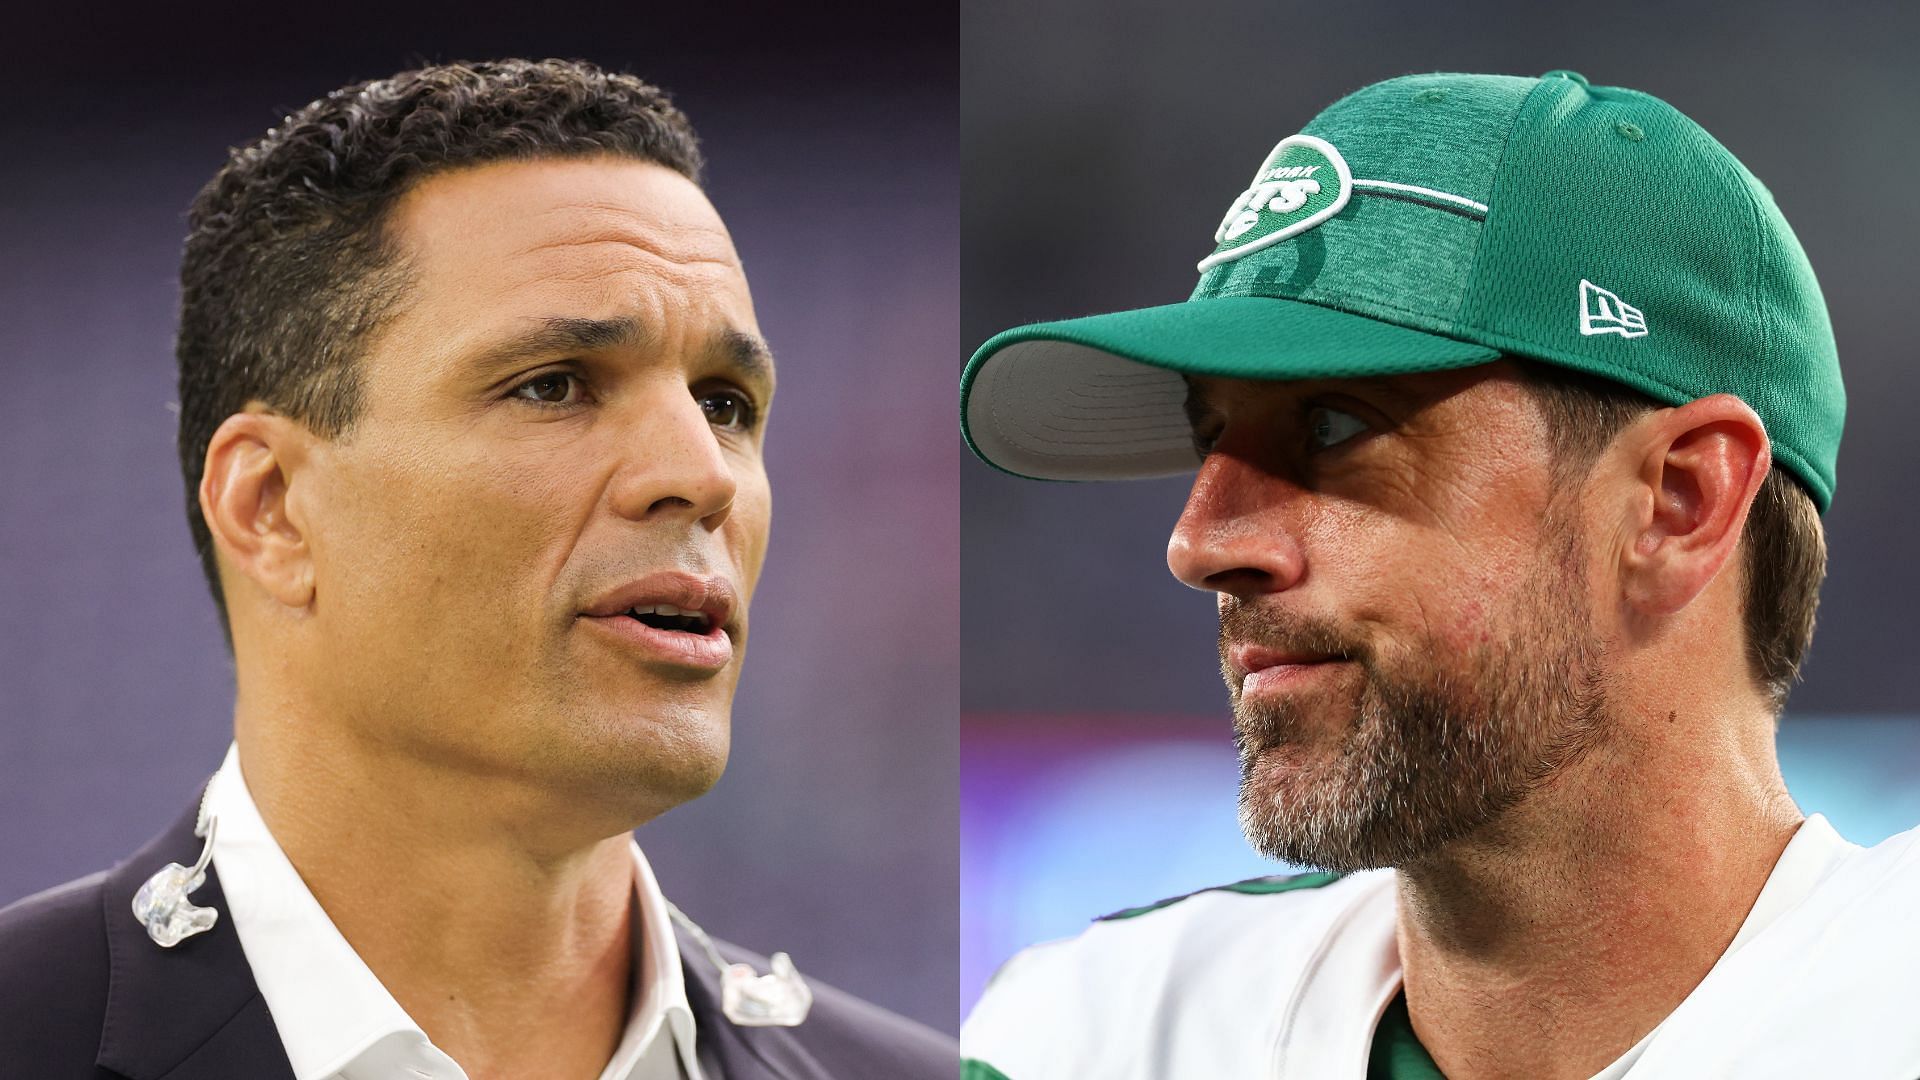 Tony Gonzalez digs up Aaron Rodgers&rsquo; darkness retreat saga over Achilles injury rehab